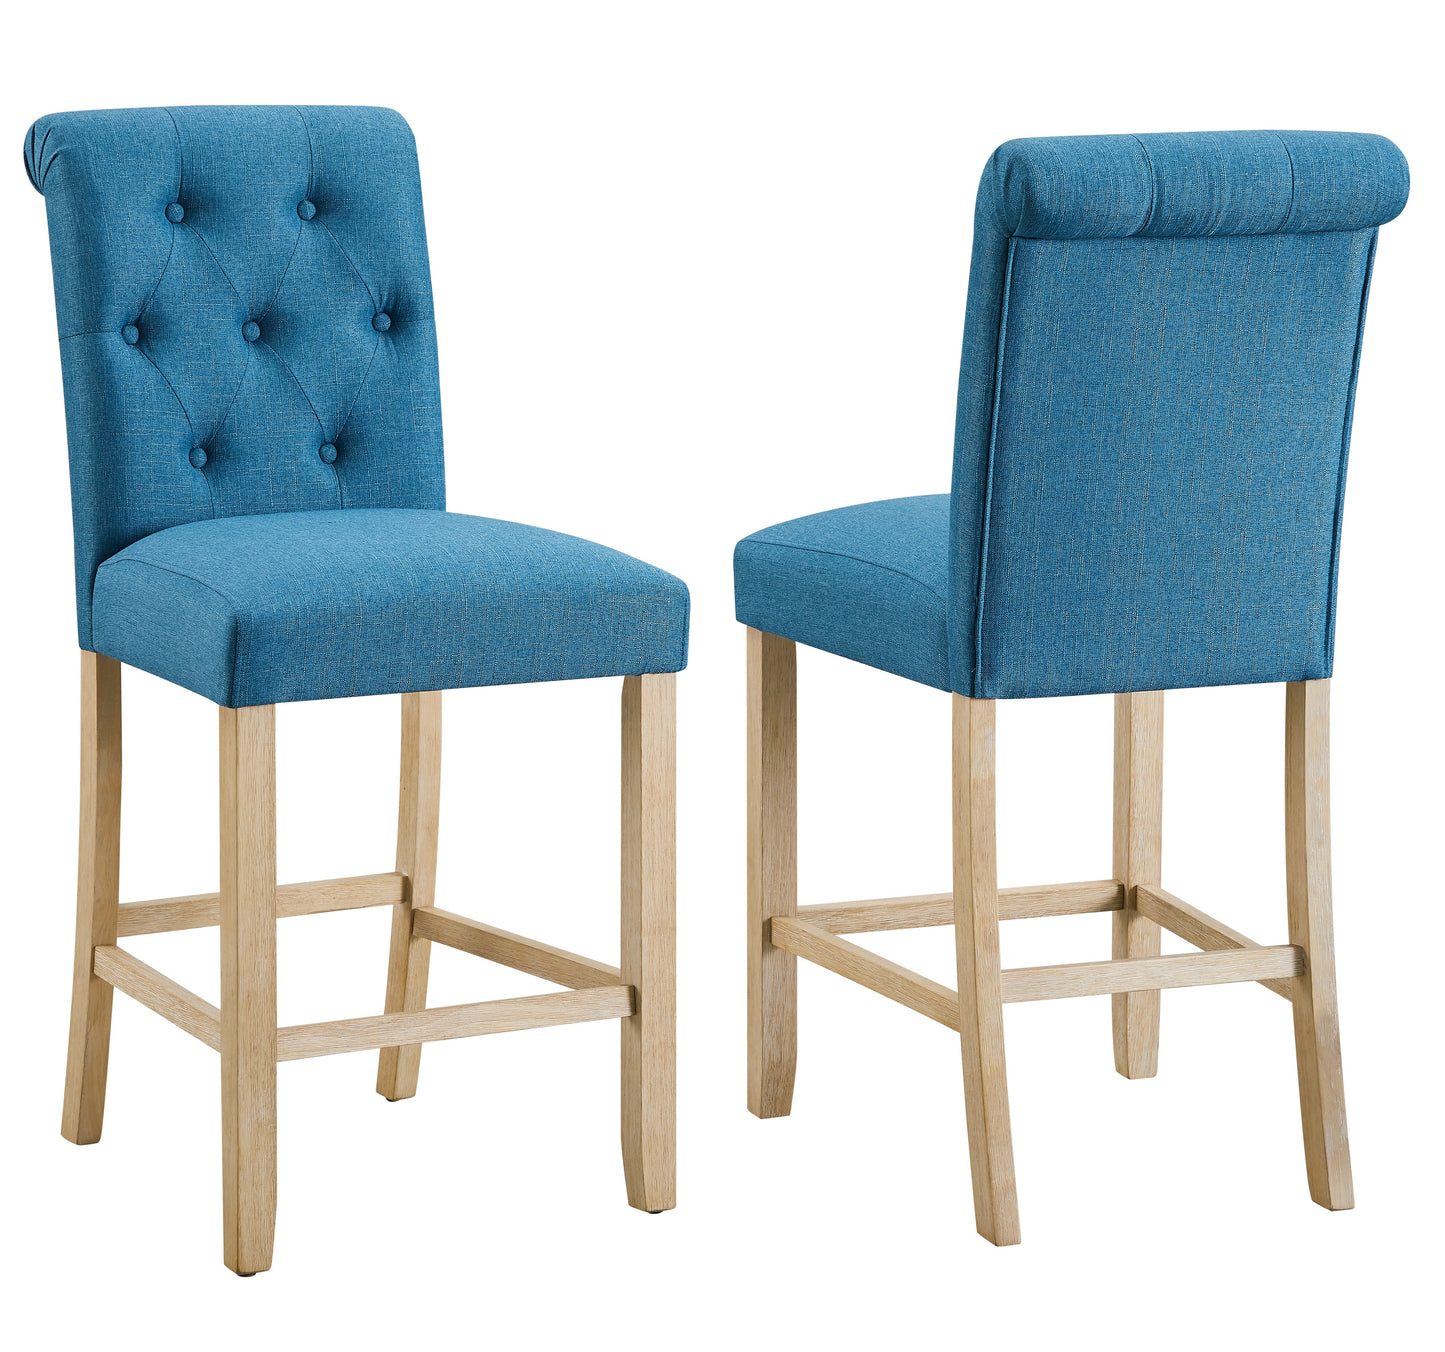 Siena Counter Height Button Tufted Back Solid Wood Stools, Set of 2, Blue